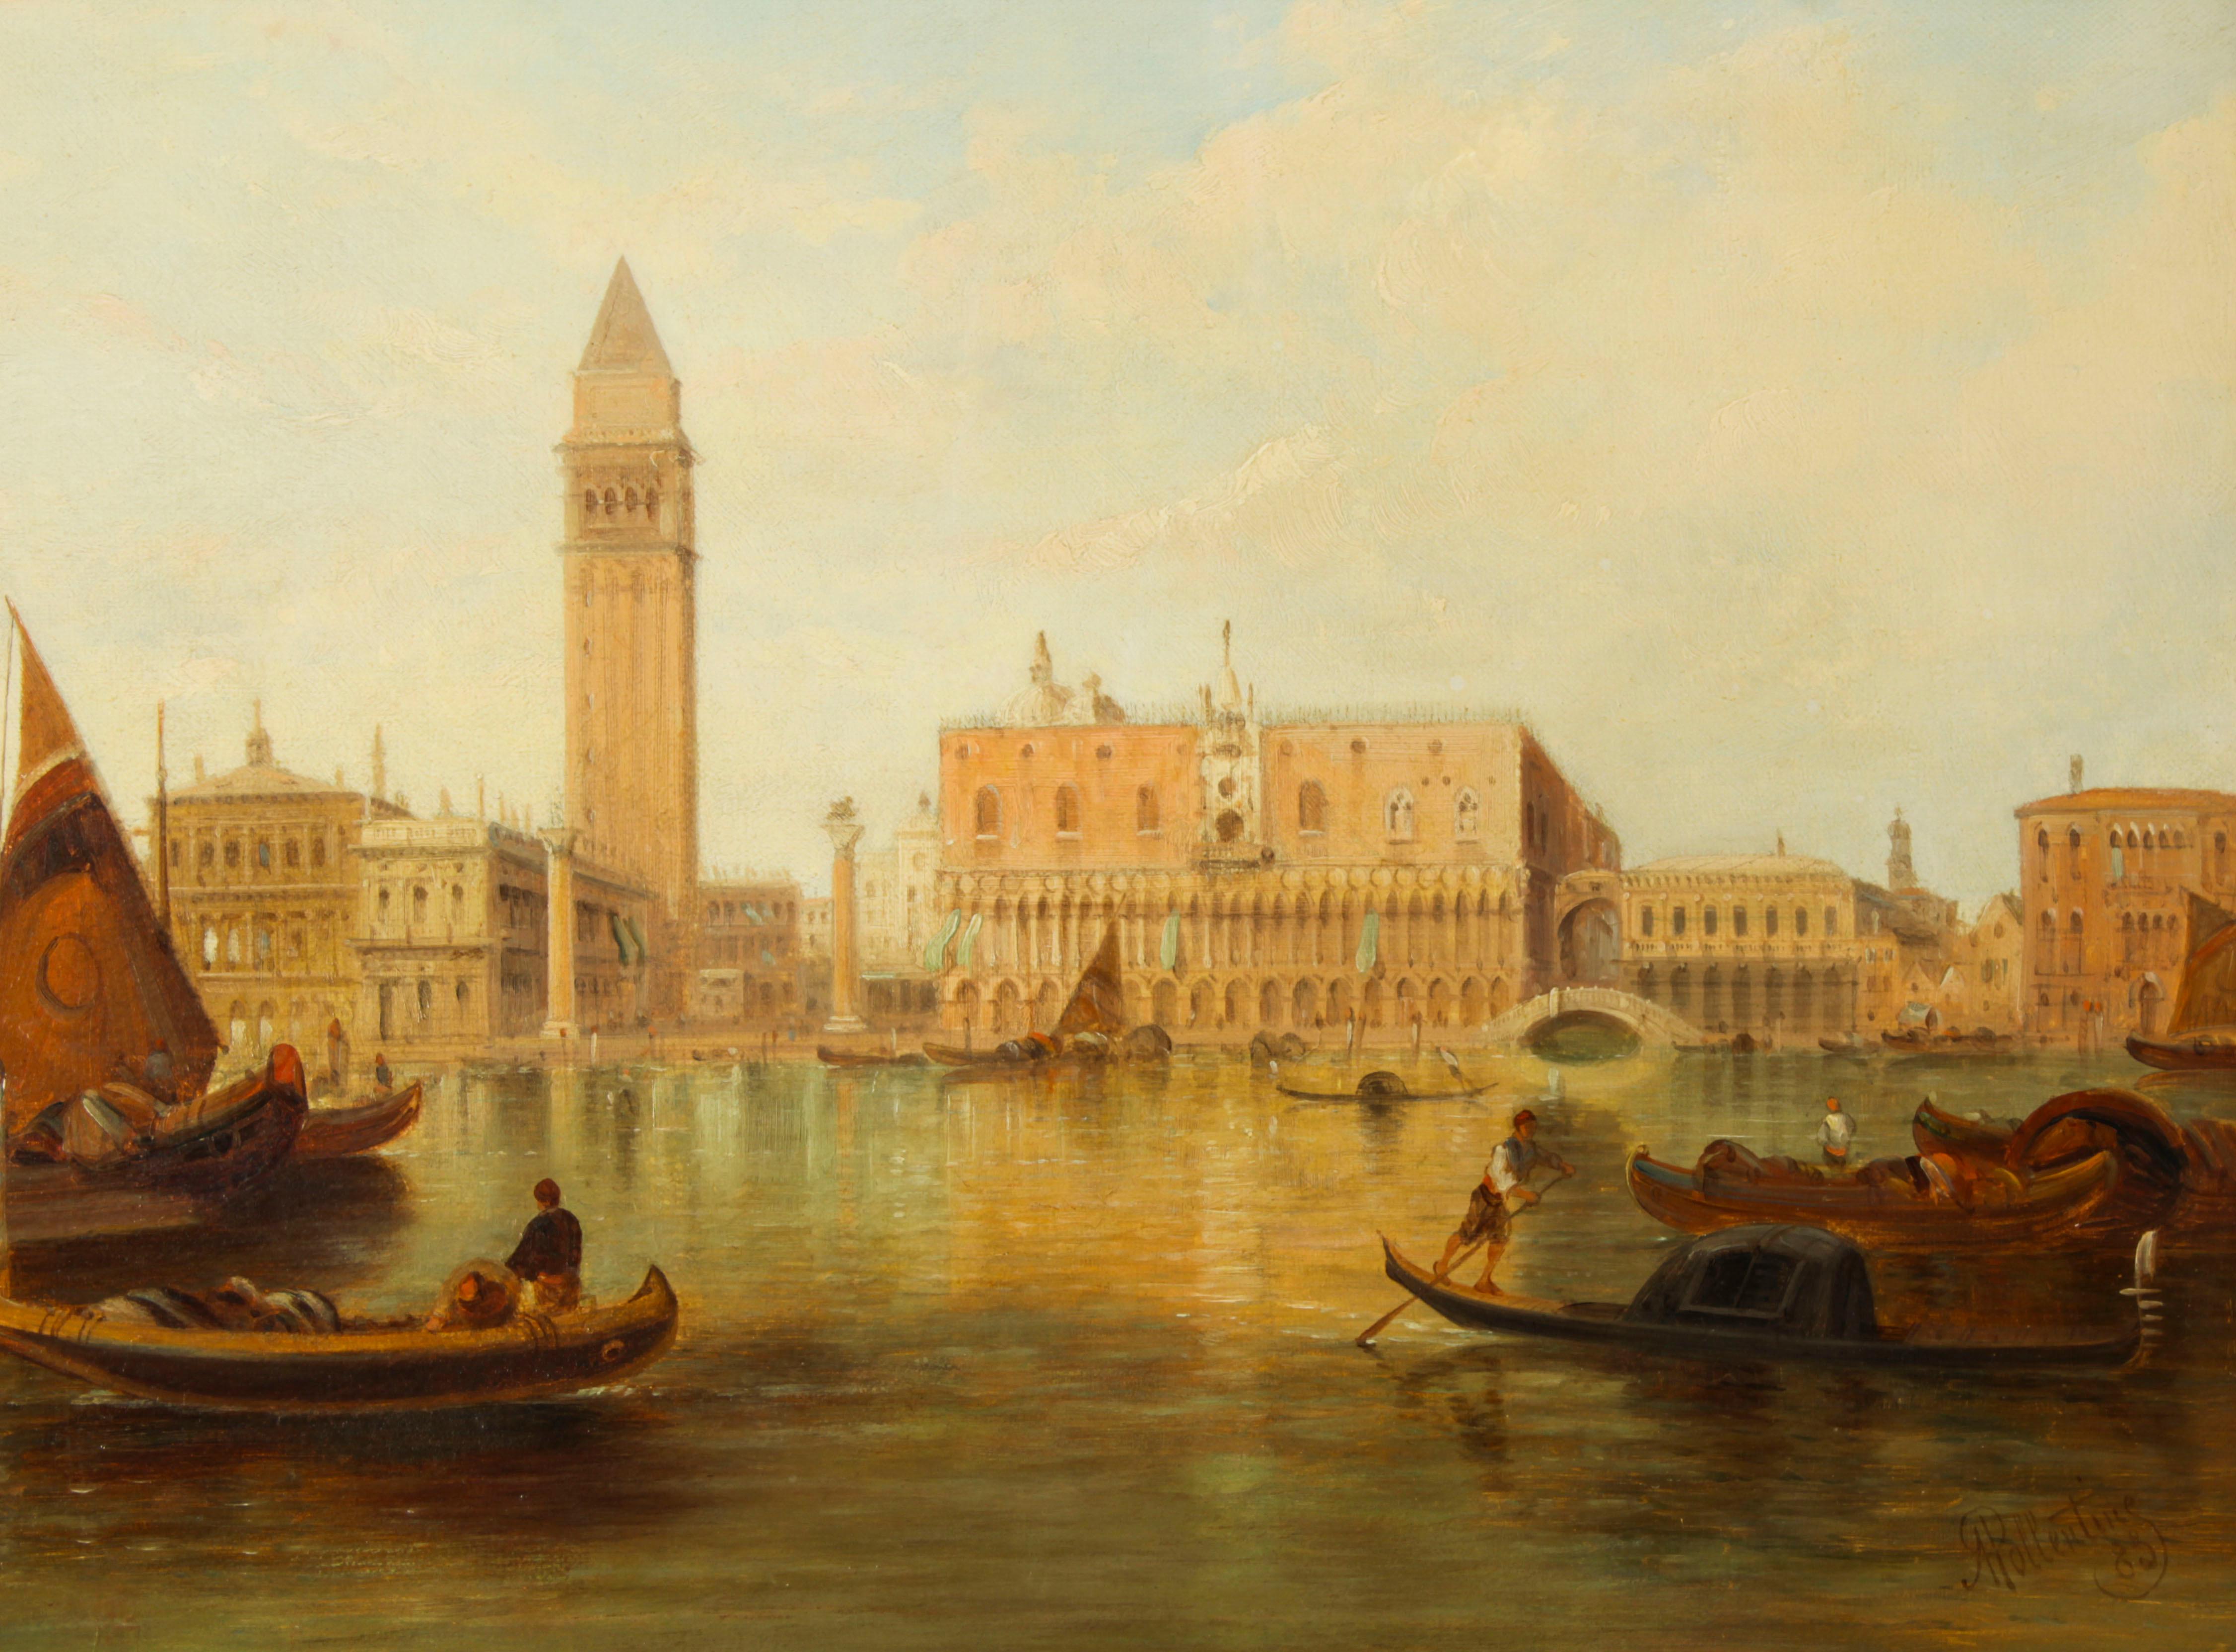 Antikes lgemlde, Grand Canal Ducal Palace, Venedig, Alfred Pollentine 1882 im Zustand „Gut“ im Angebot in London, GB